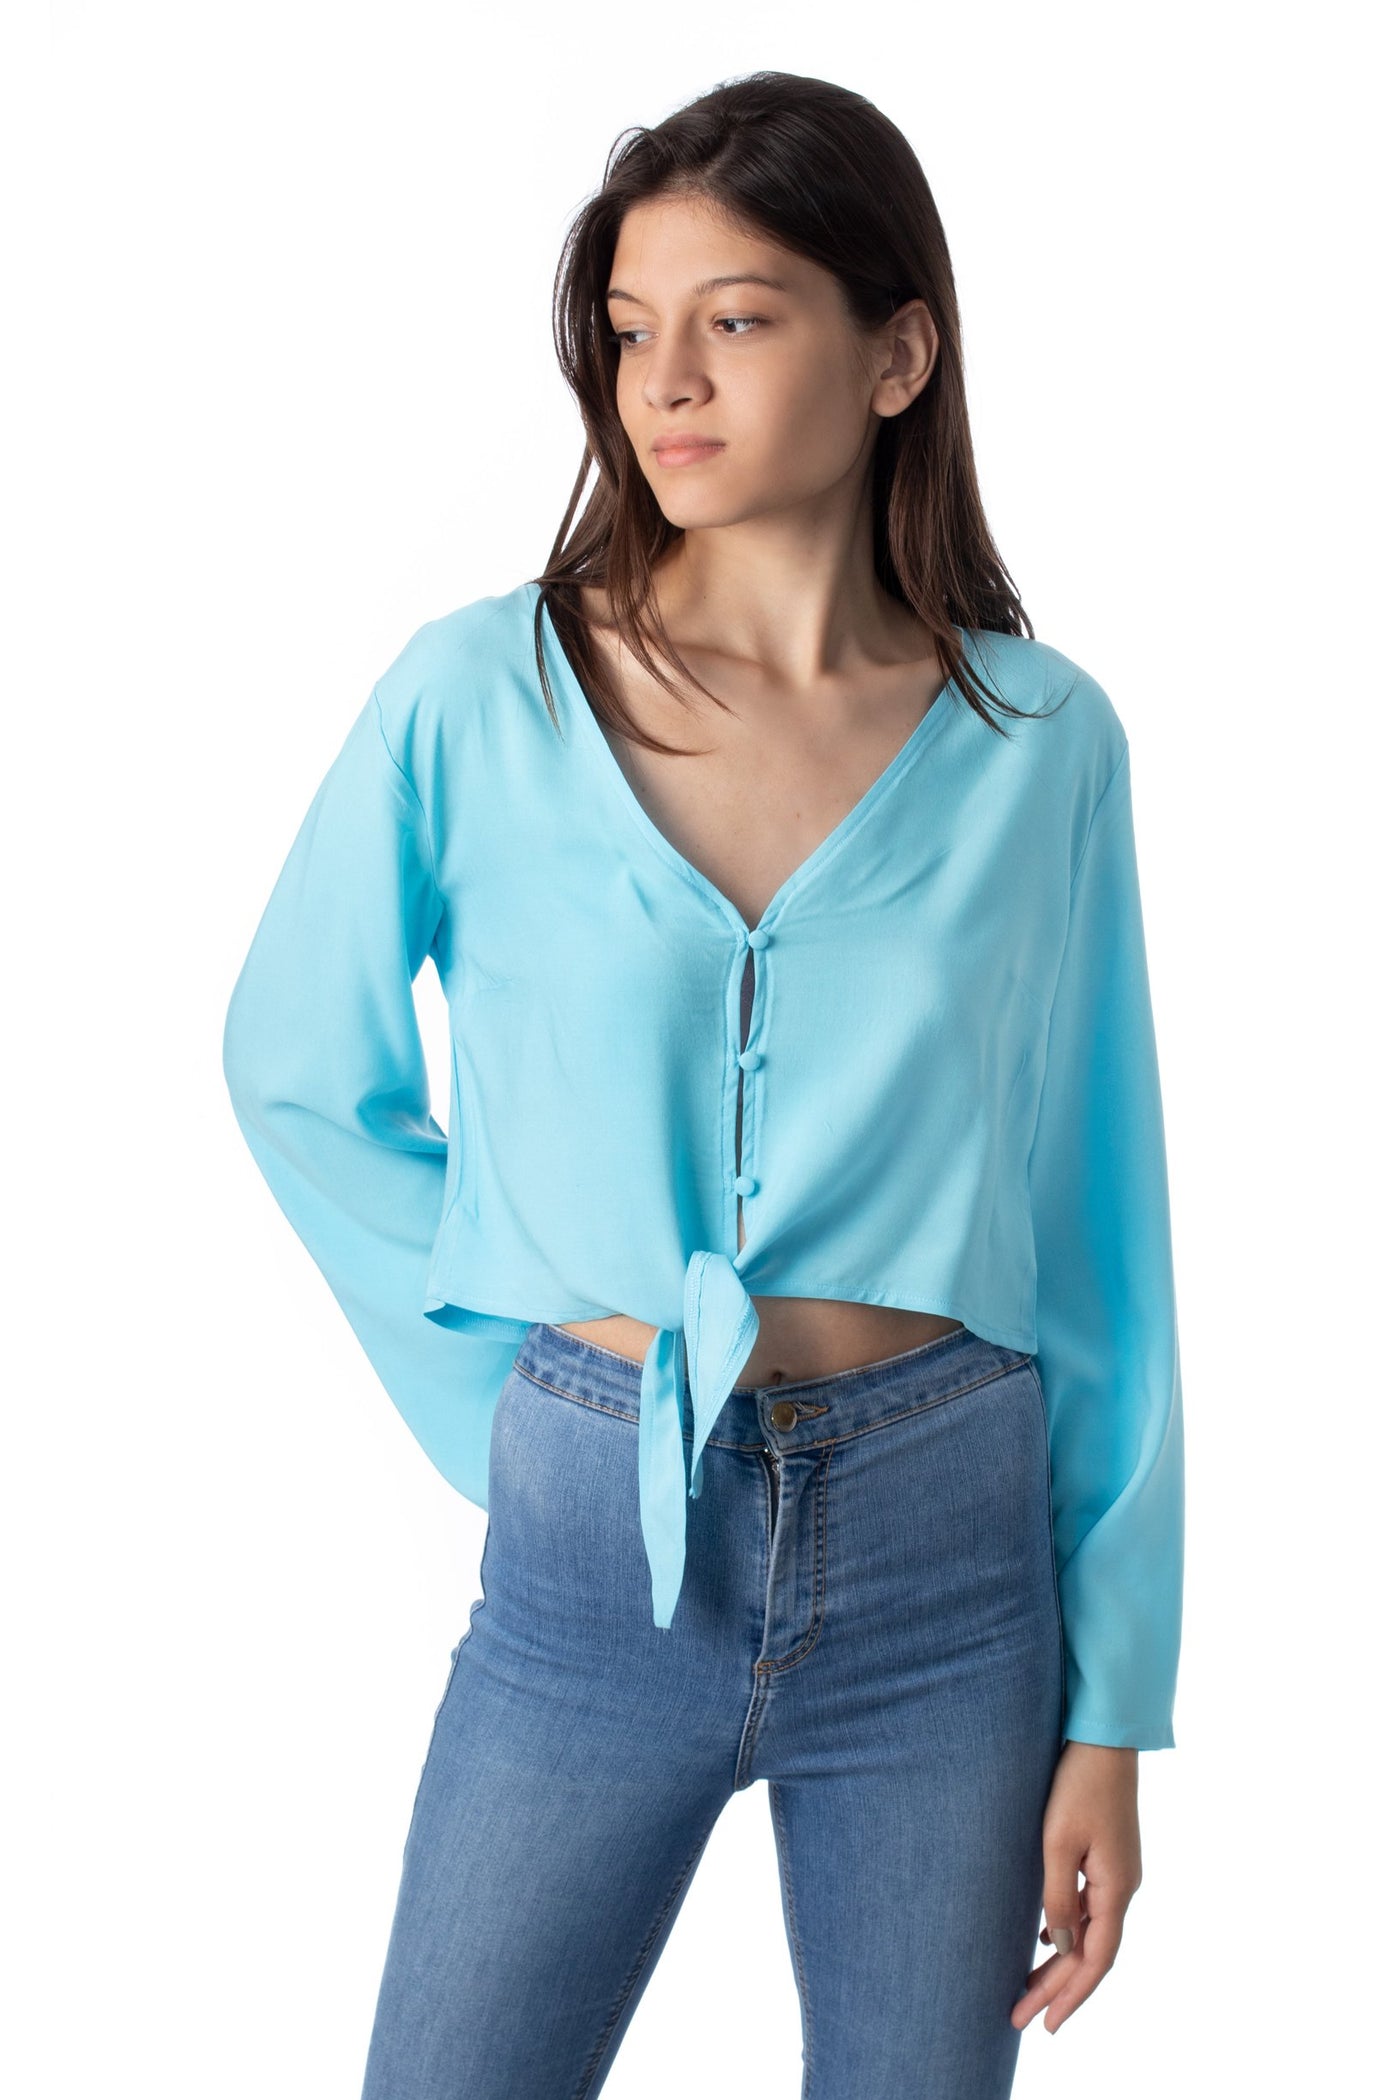 chassca long sleeve tie front shirt - Breakmood